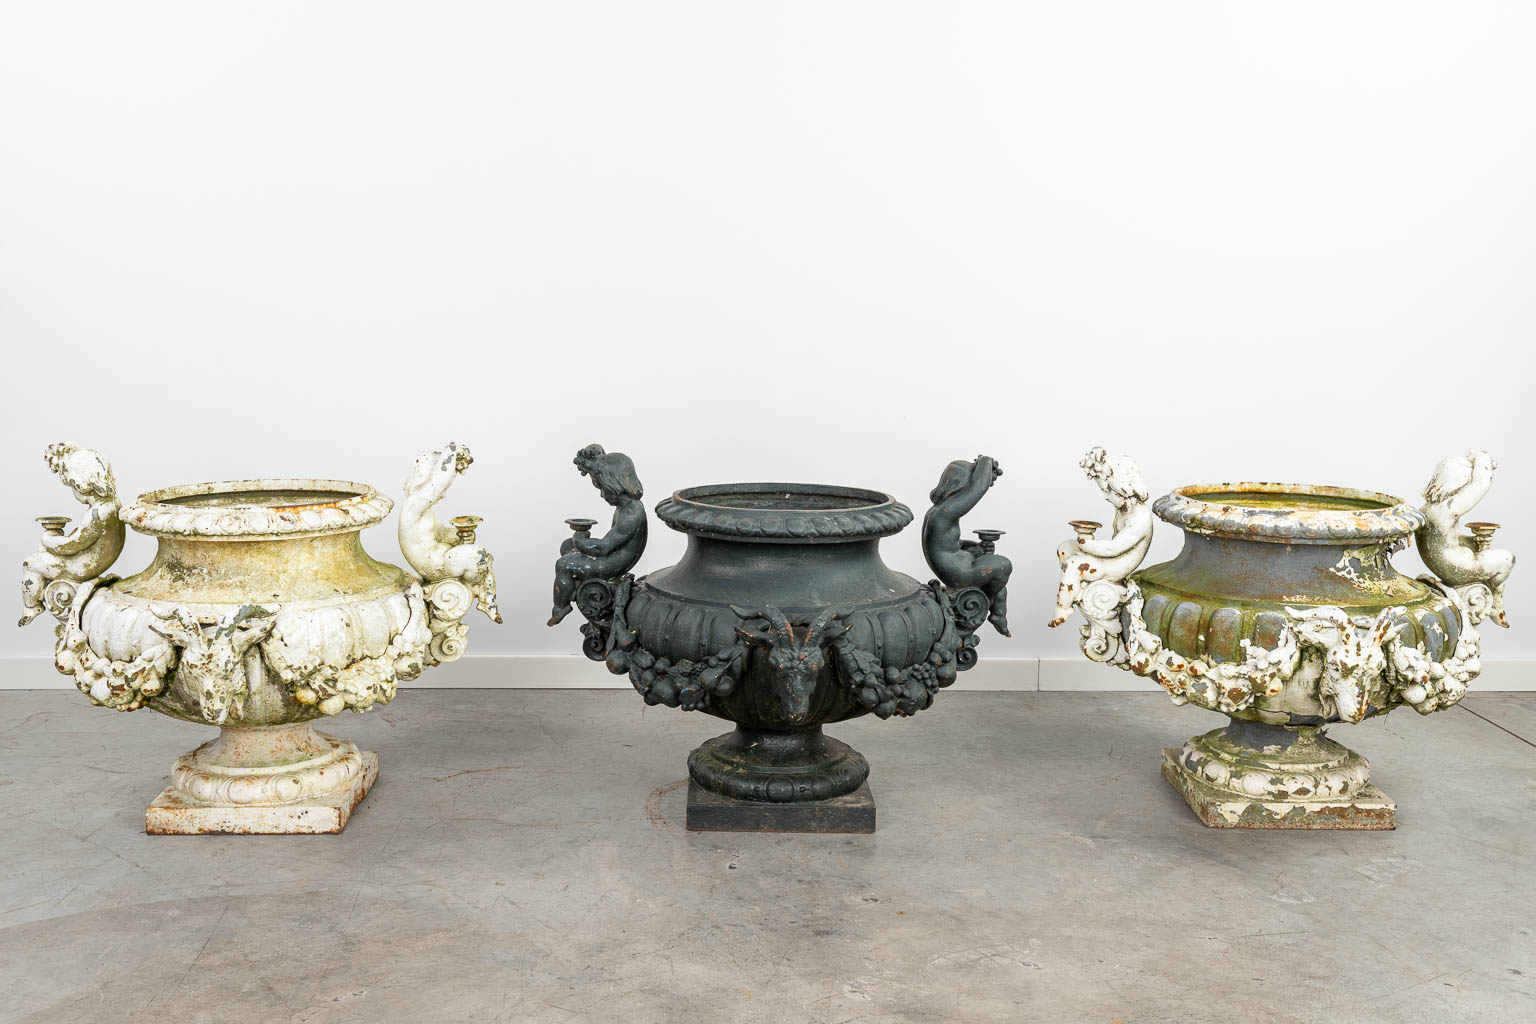 A set of 3 large garden vases made of cast iron, decorated with putti and ram